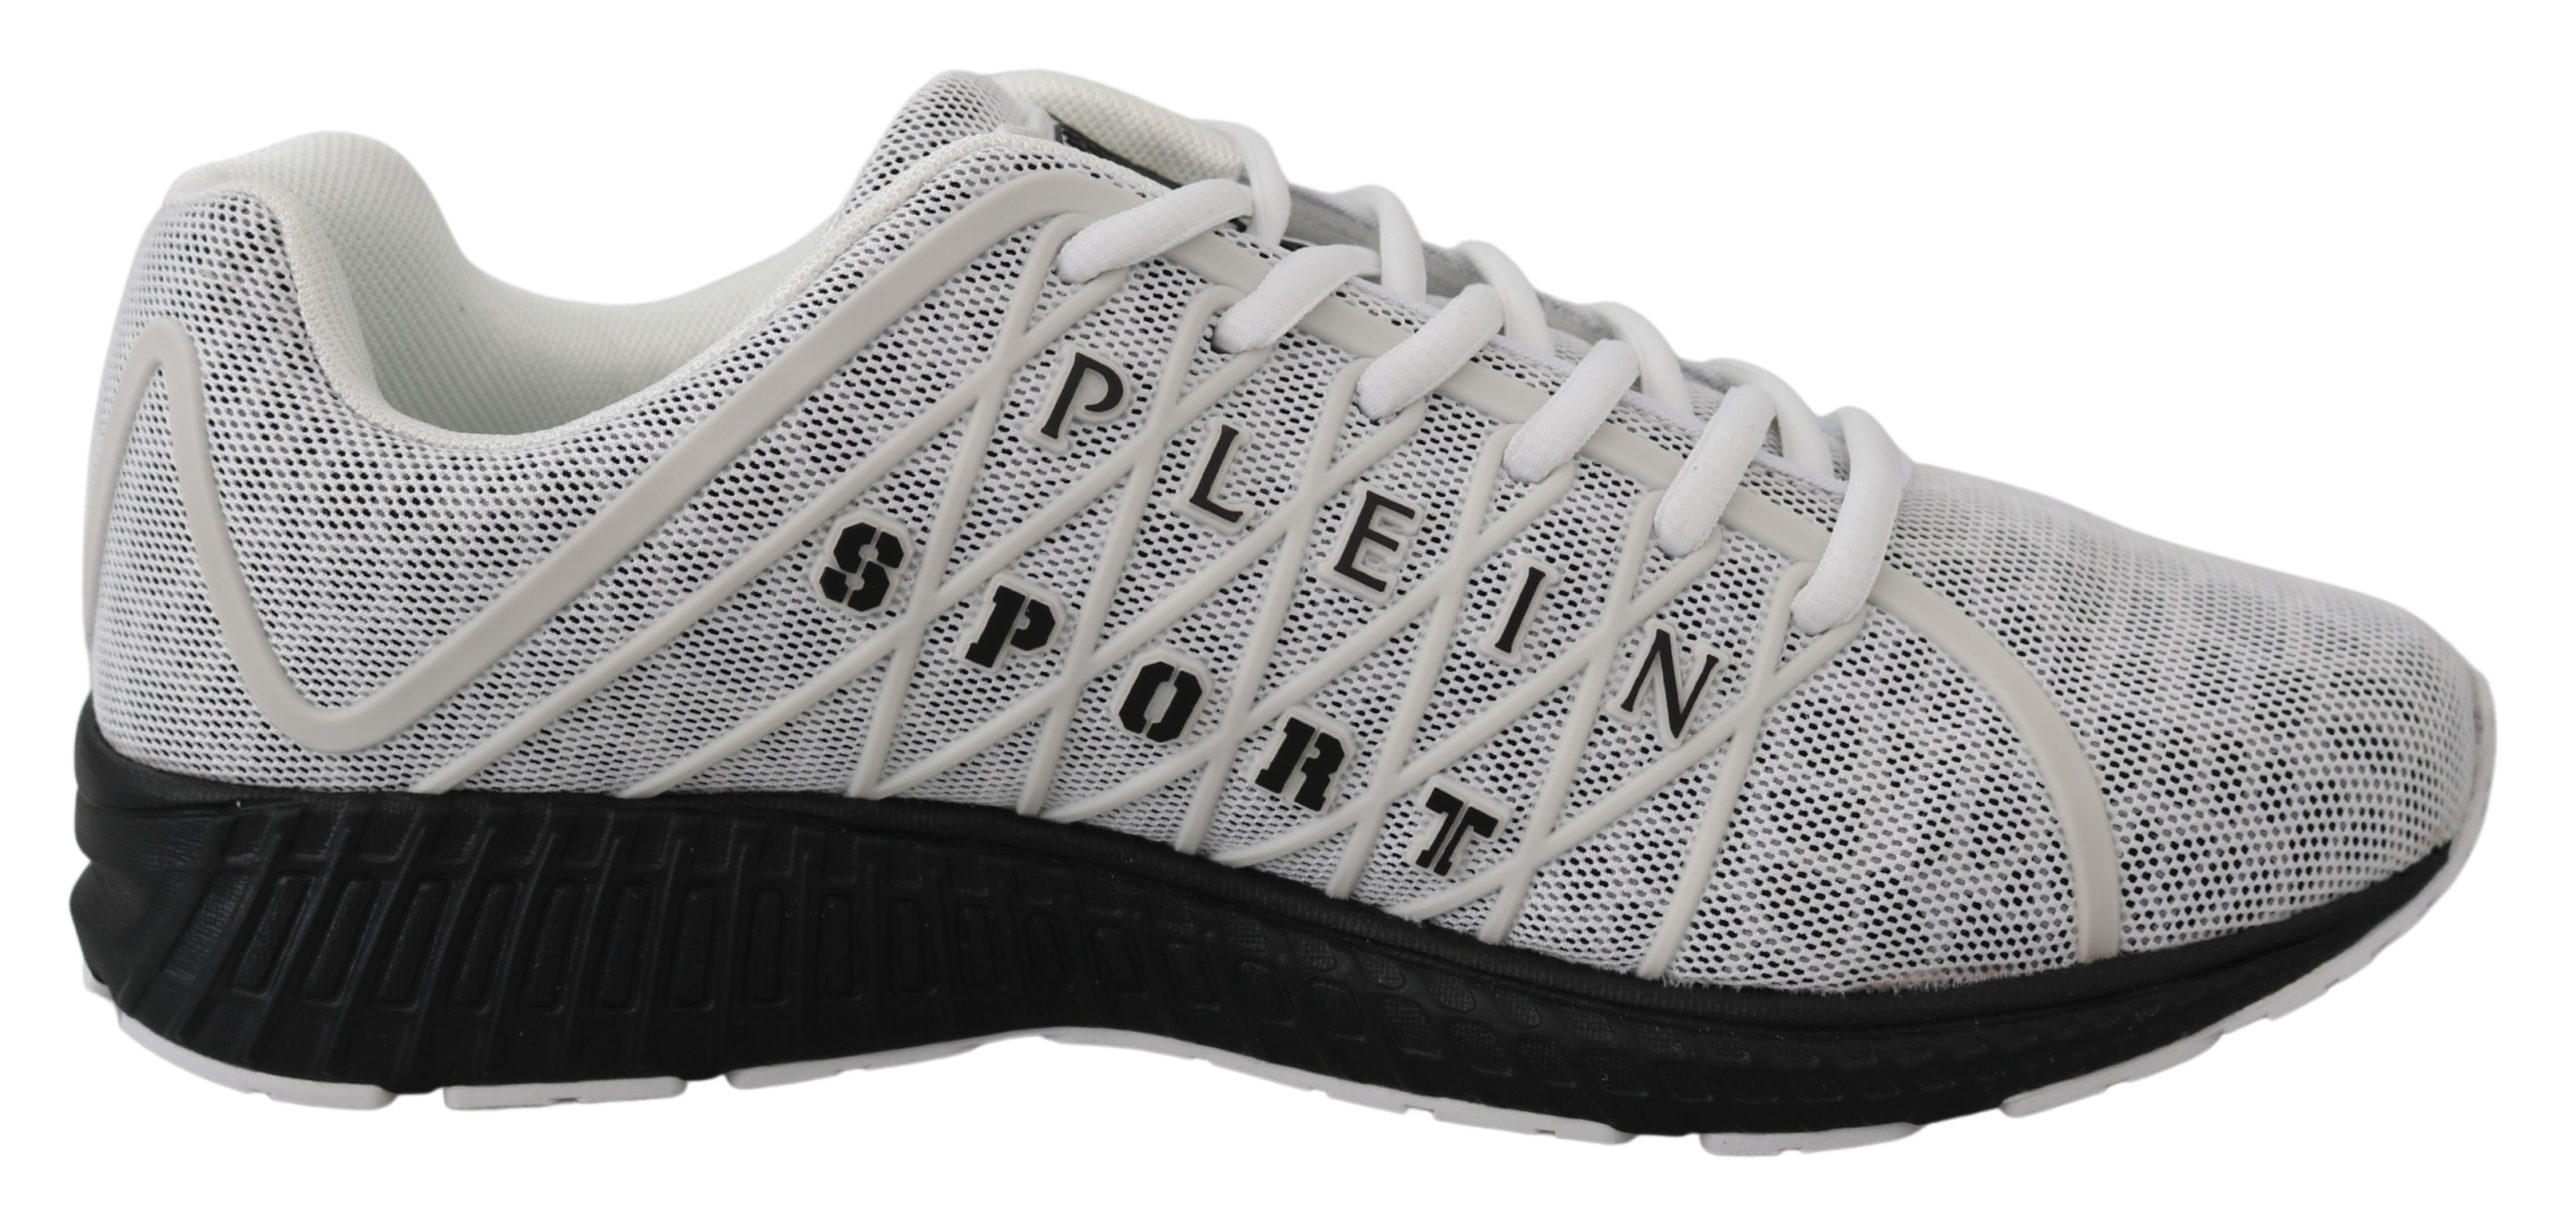 Plein Sport Polyester Runner Shoes • Fashion Brands Outlet